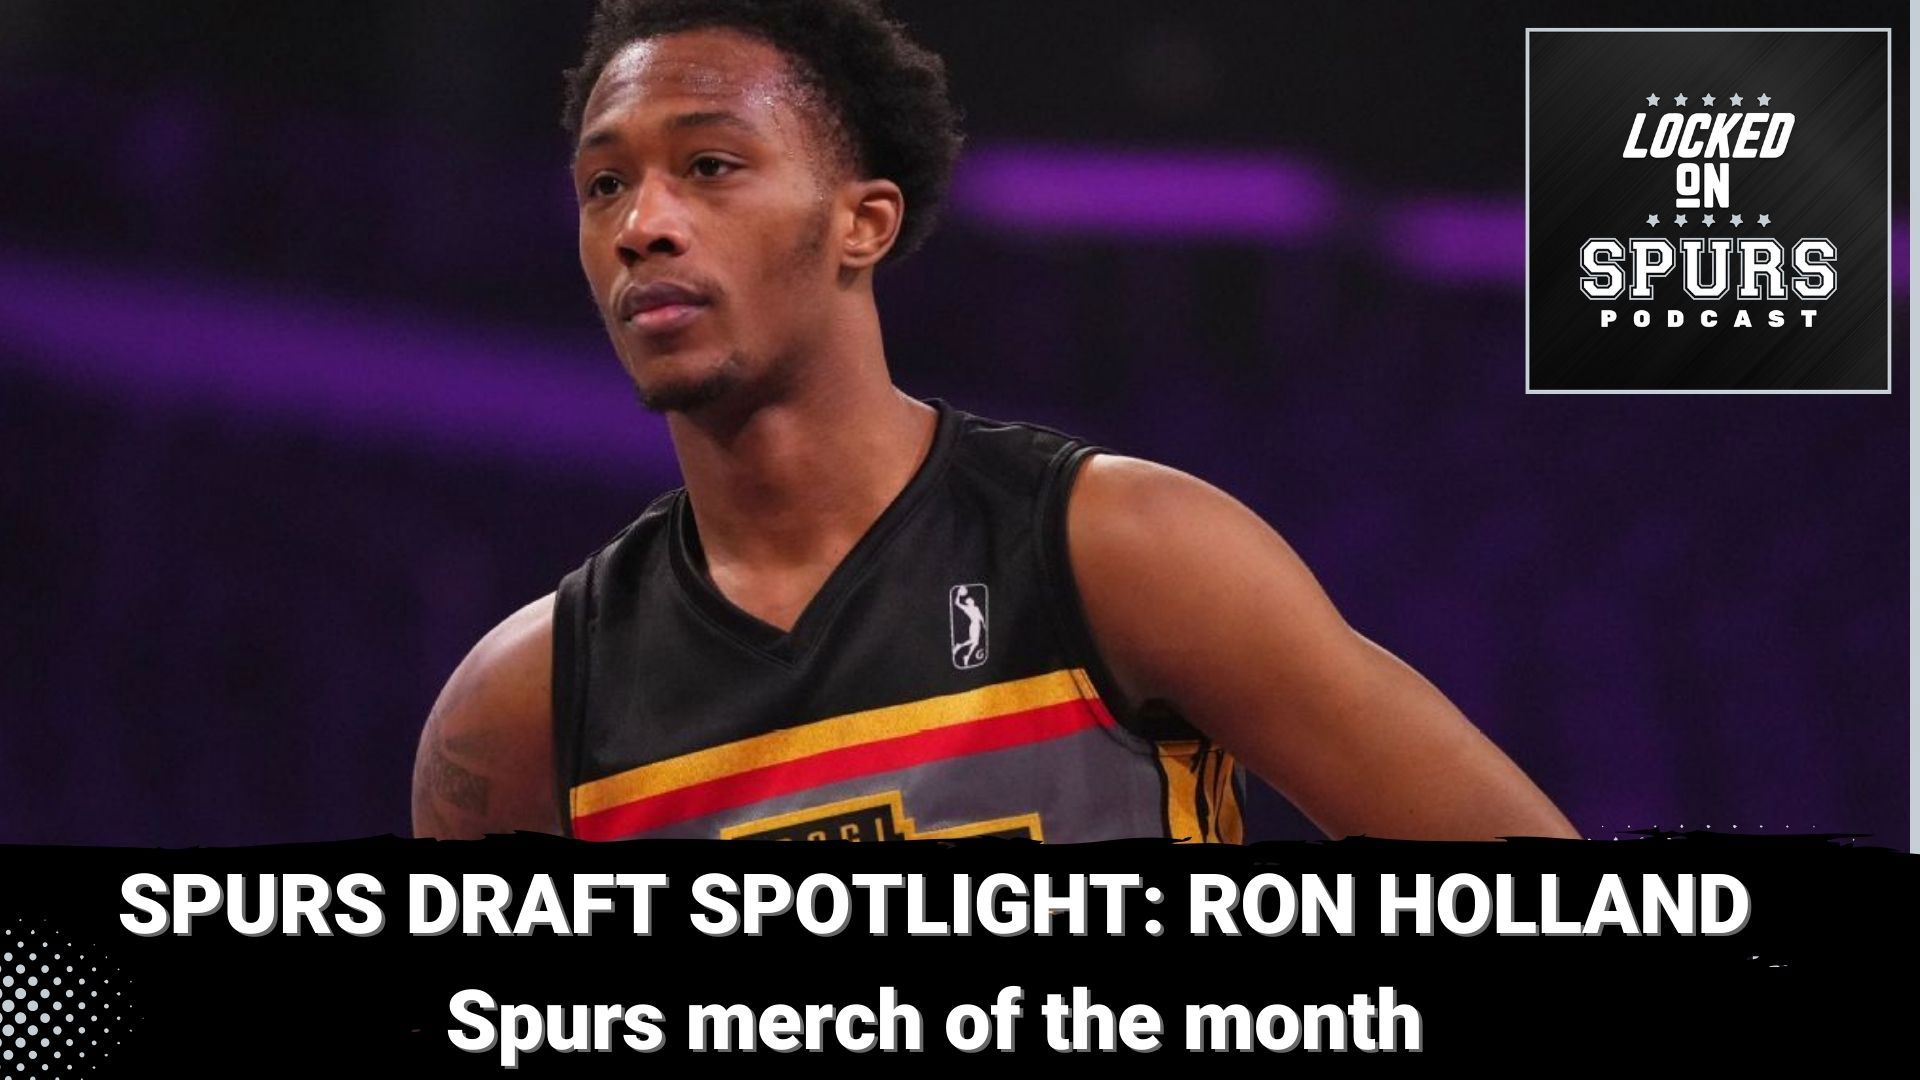 Should the Spurs consider selecting Ron Holland at the upcoming NBA Draft?